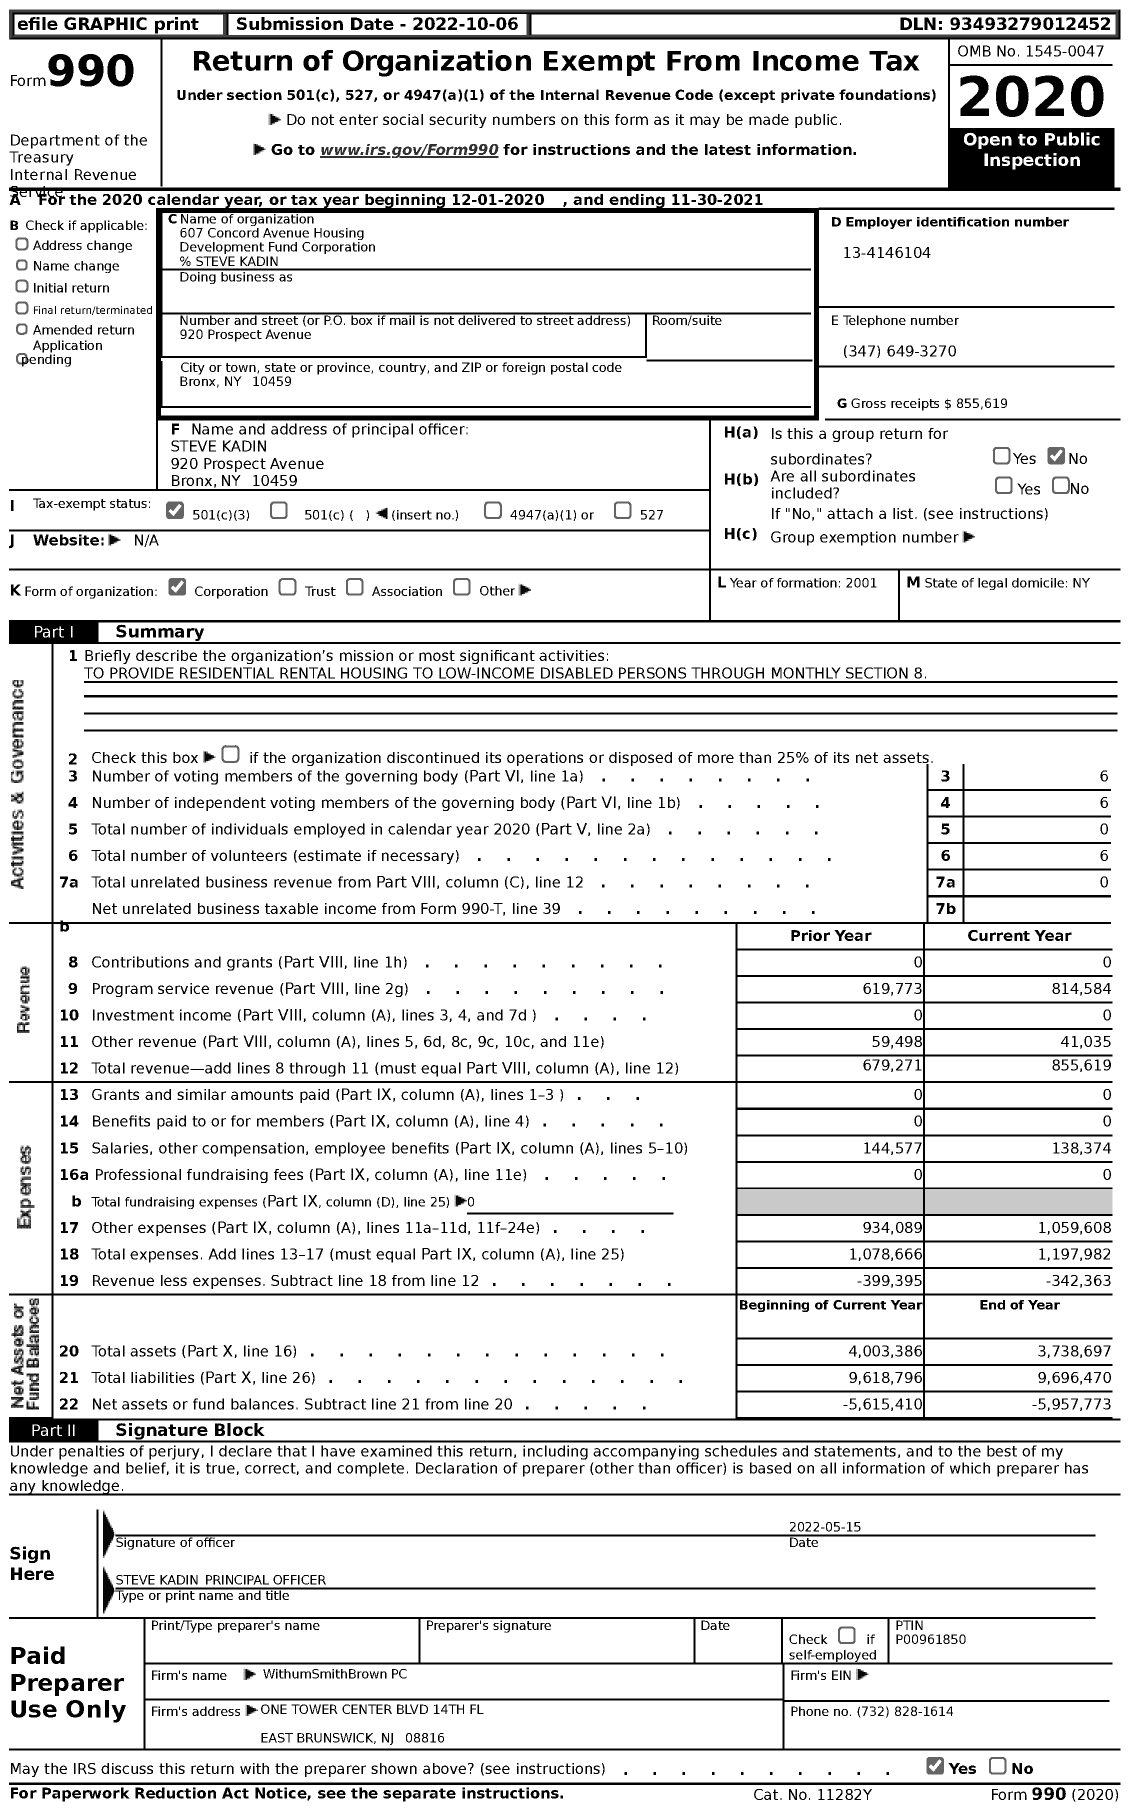 Image of first page of 2020 Form 990 for 607 Concord Avenue Housing Development Fund Corporation